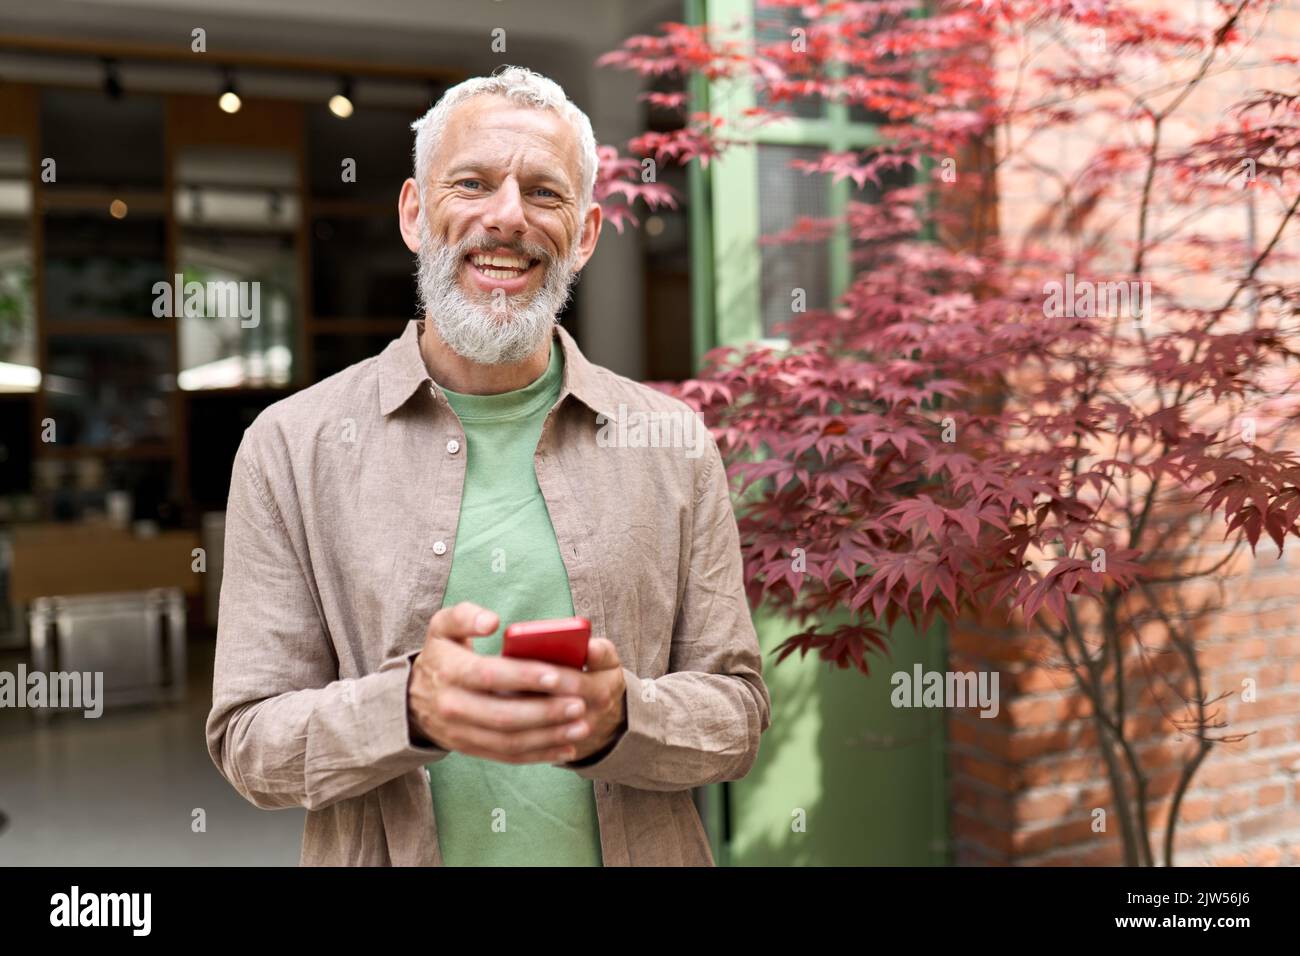 Smiling older middle aged man using phone standing outdoors. Stock Photo